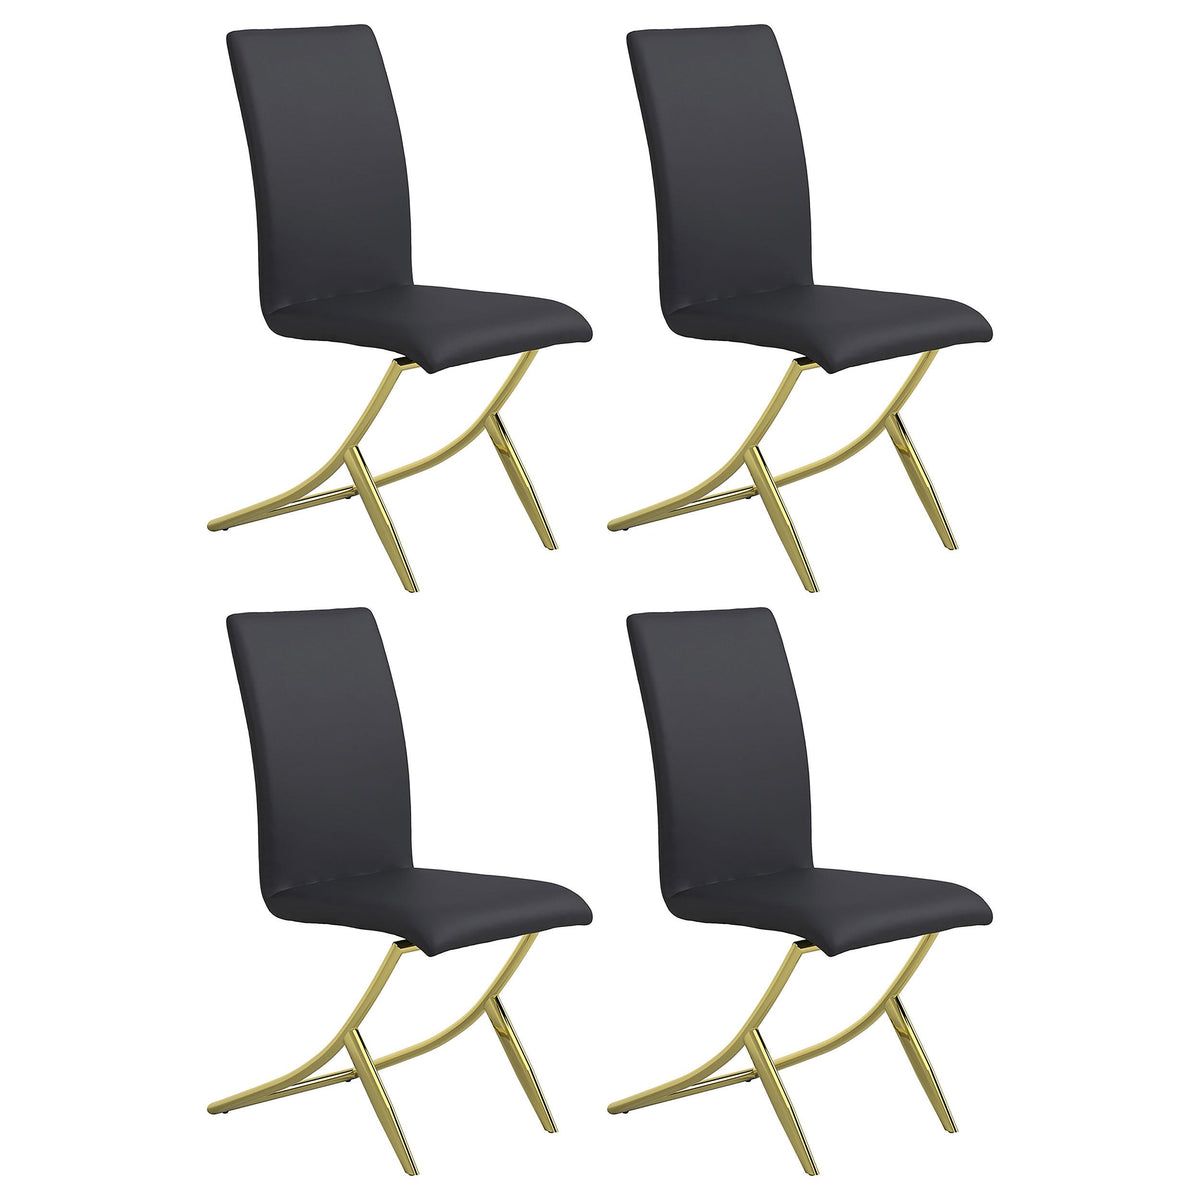 Carmelia Upholstered Side Chairs Black (Set of 4) Carmelia Upholstered Side Chairs Black (Set of 4) Half Price Furniture